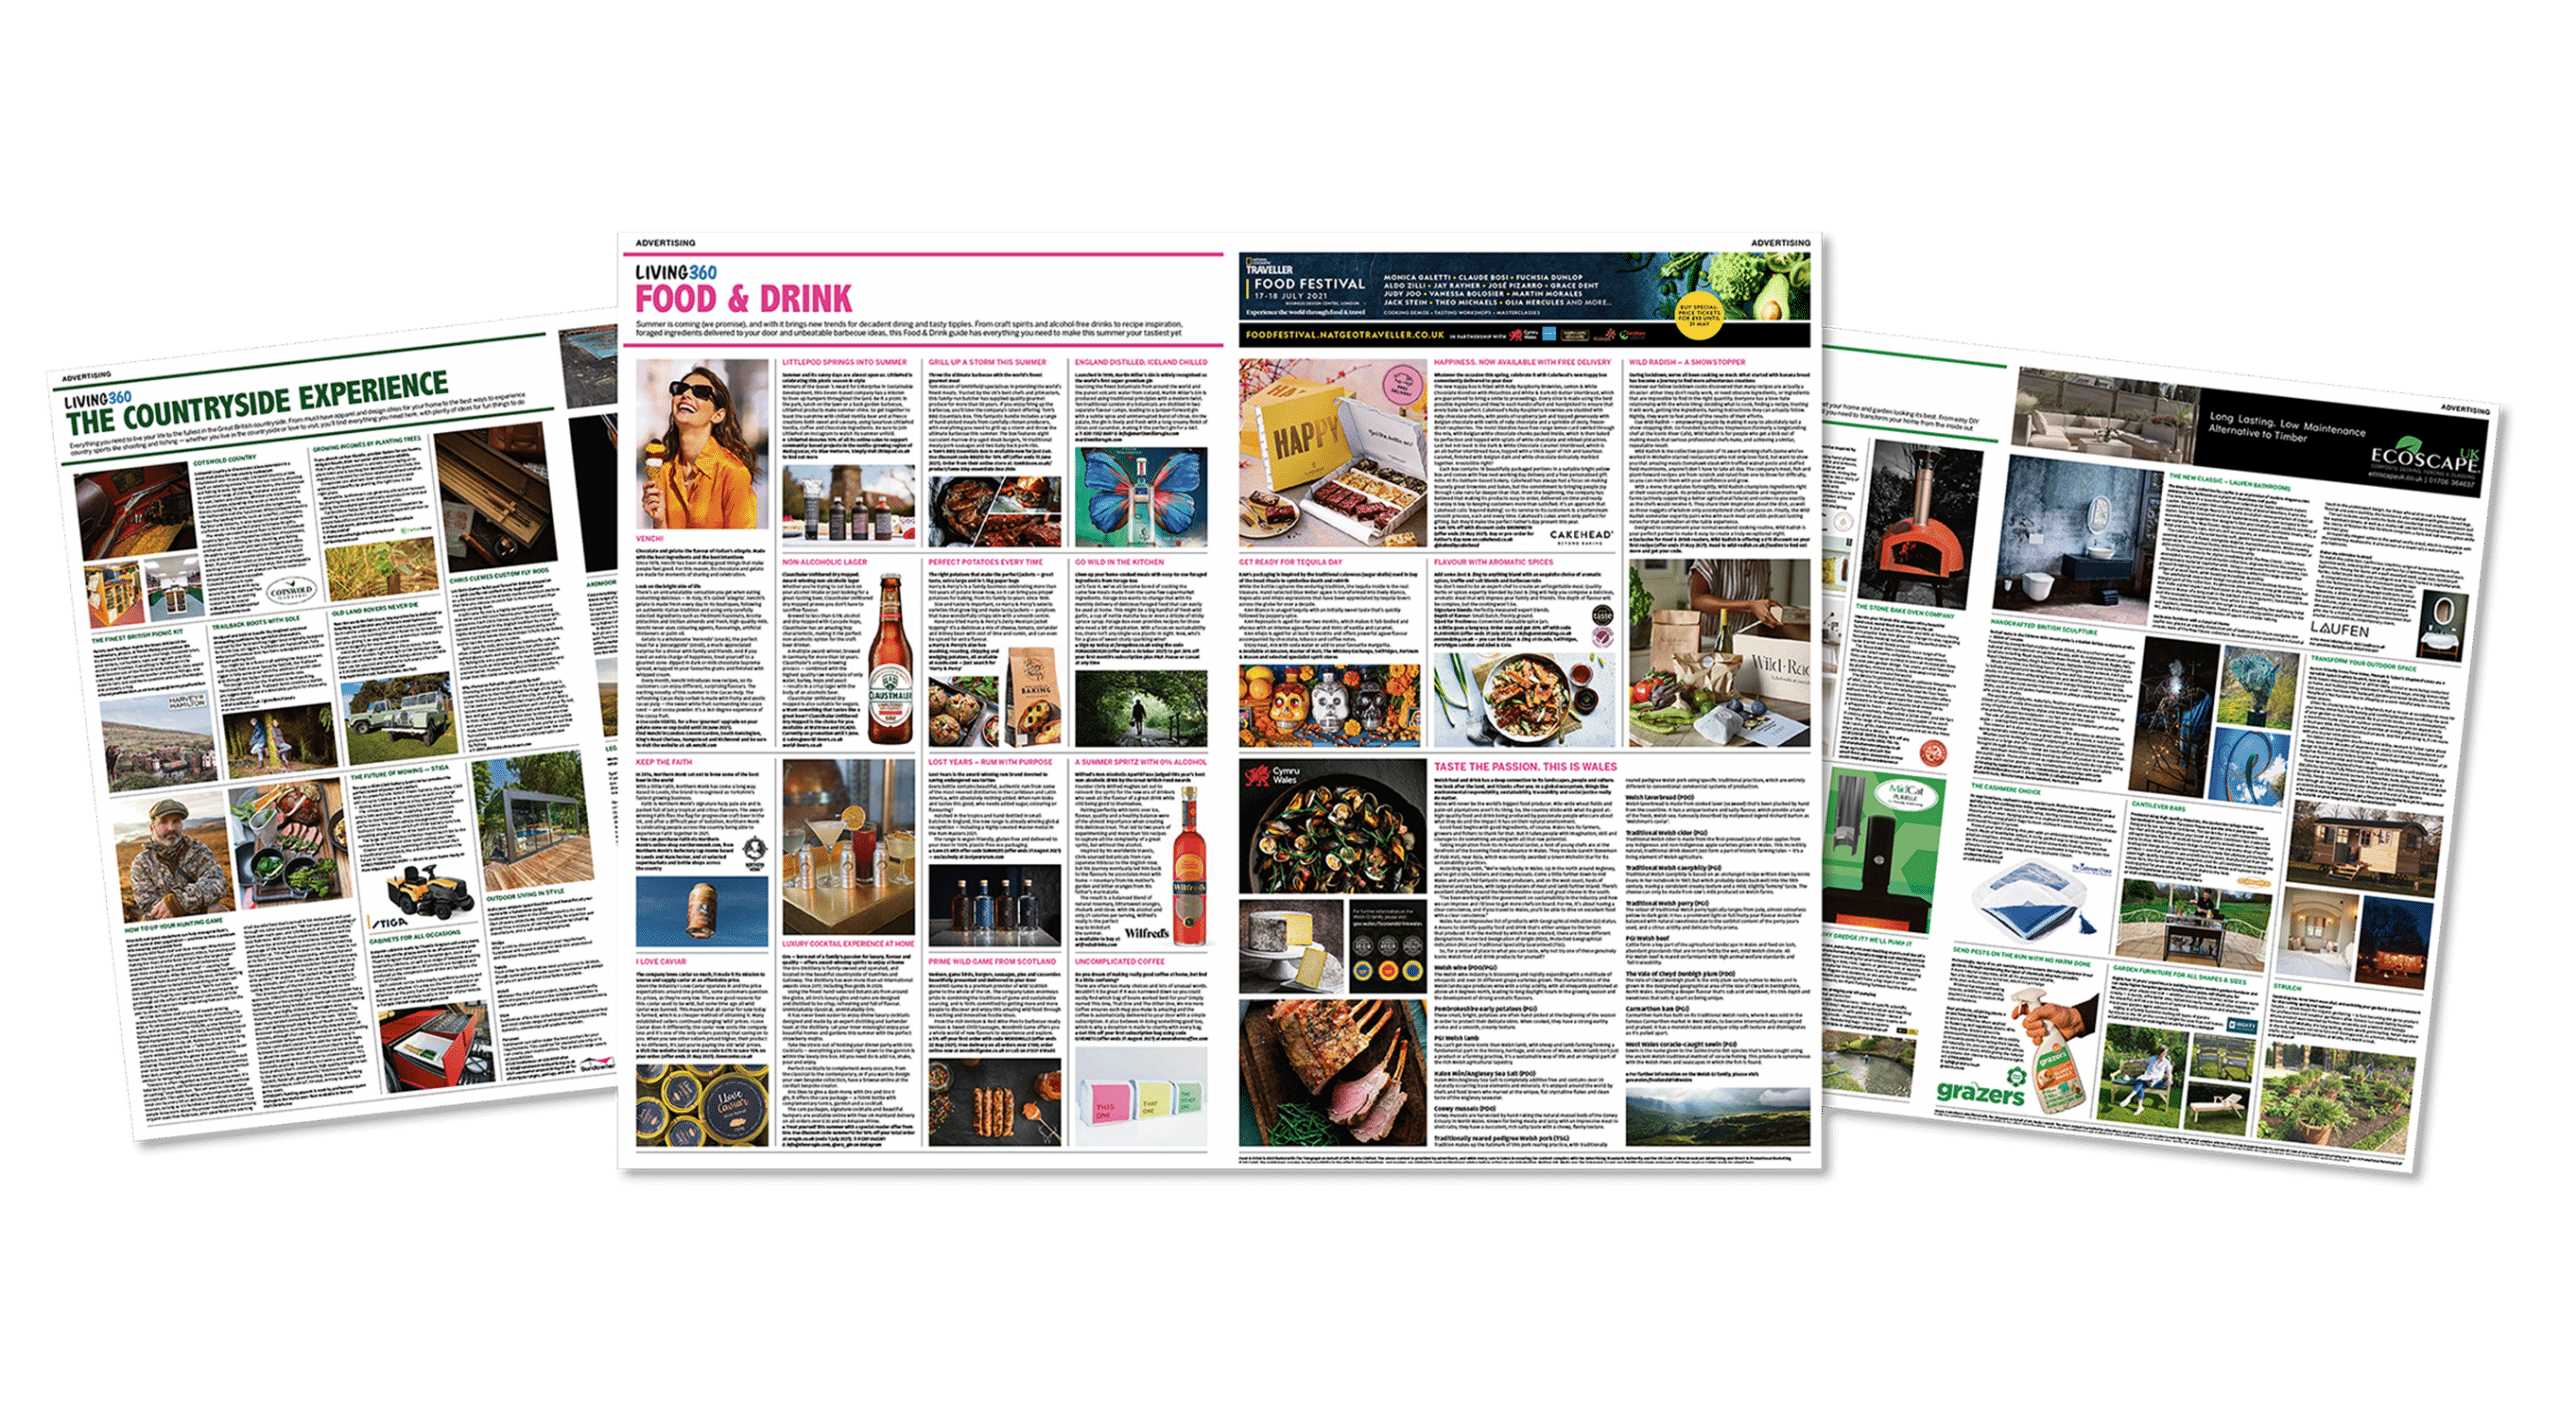 APL Media’s newspaper division produces a weekly, branded-content, double-page spread for The Telegraph on Saturday.